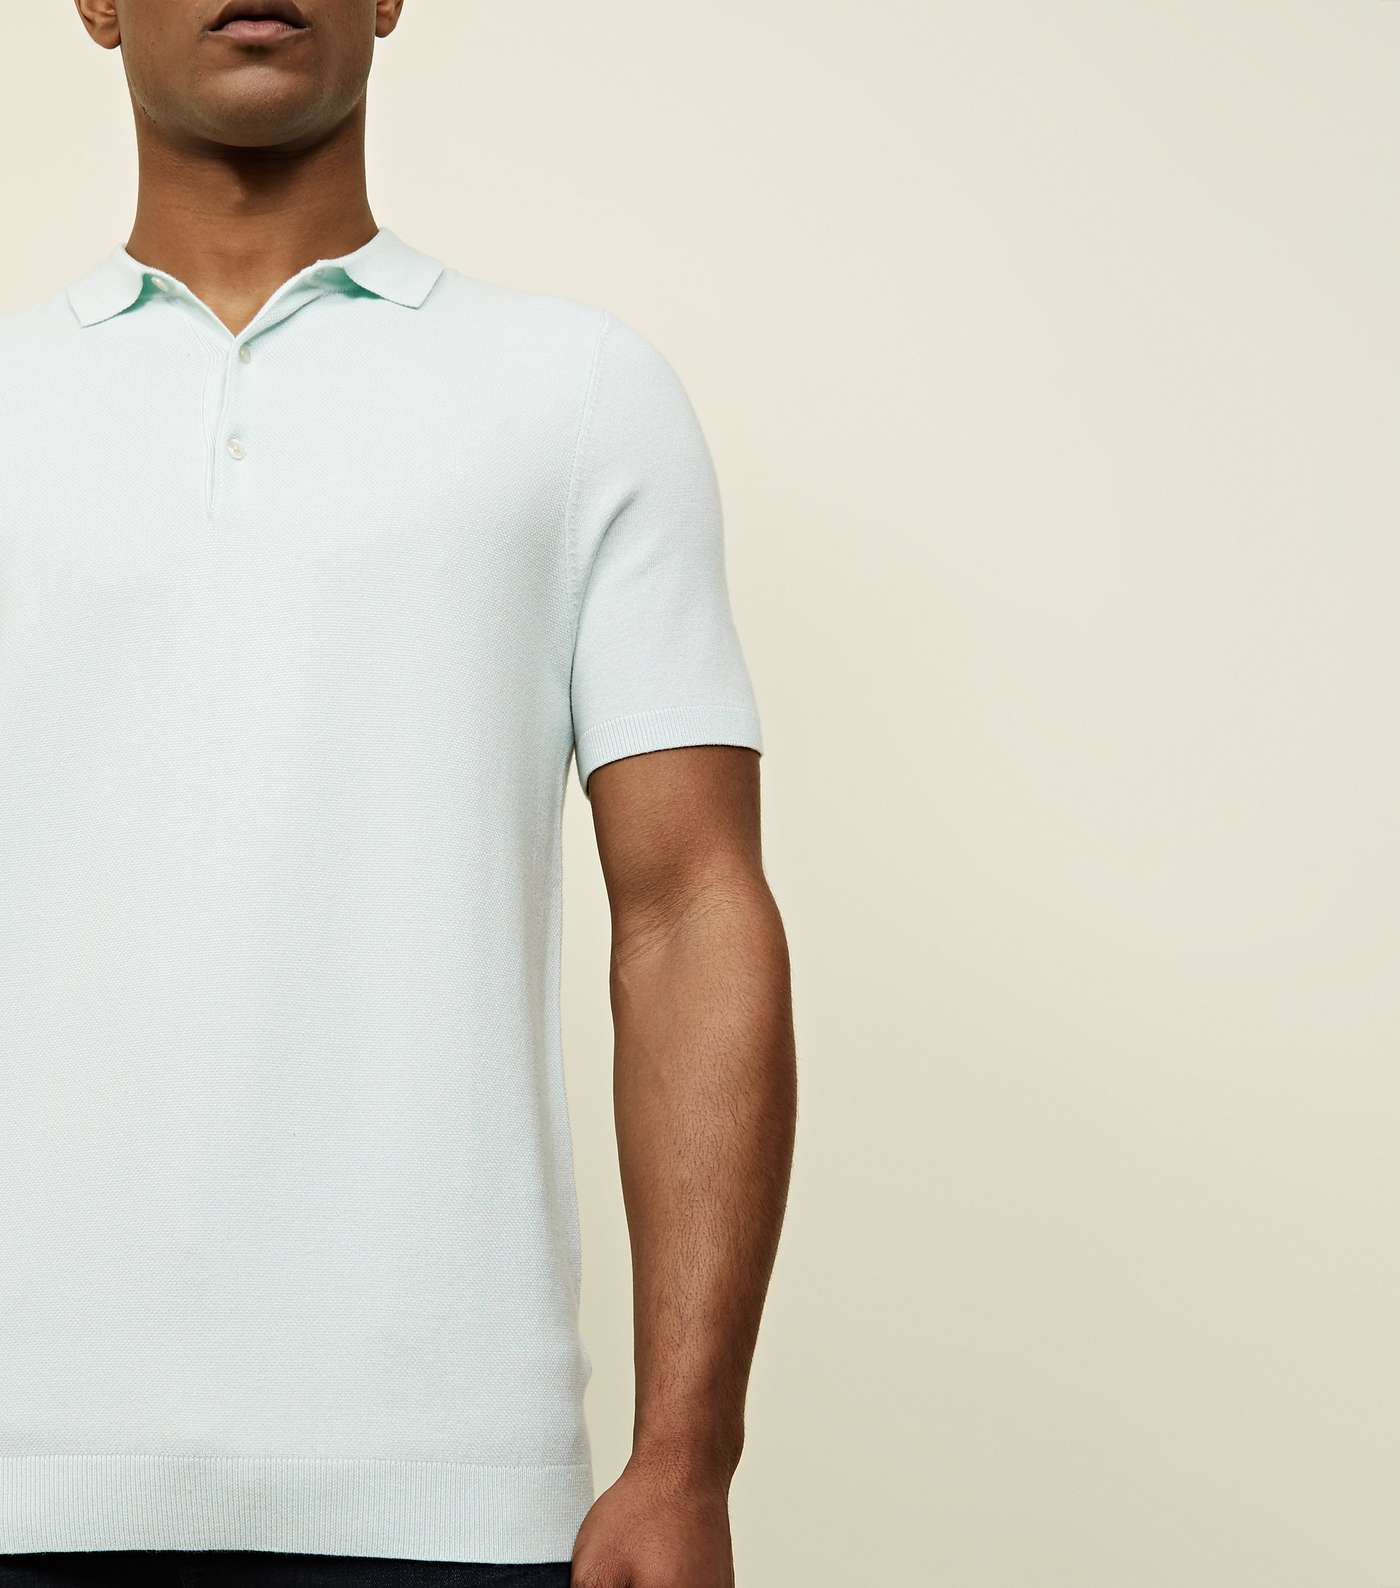 Mint Green Knit Slim Fit Polo Shirt Image 4